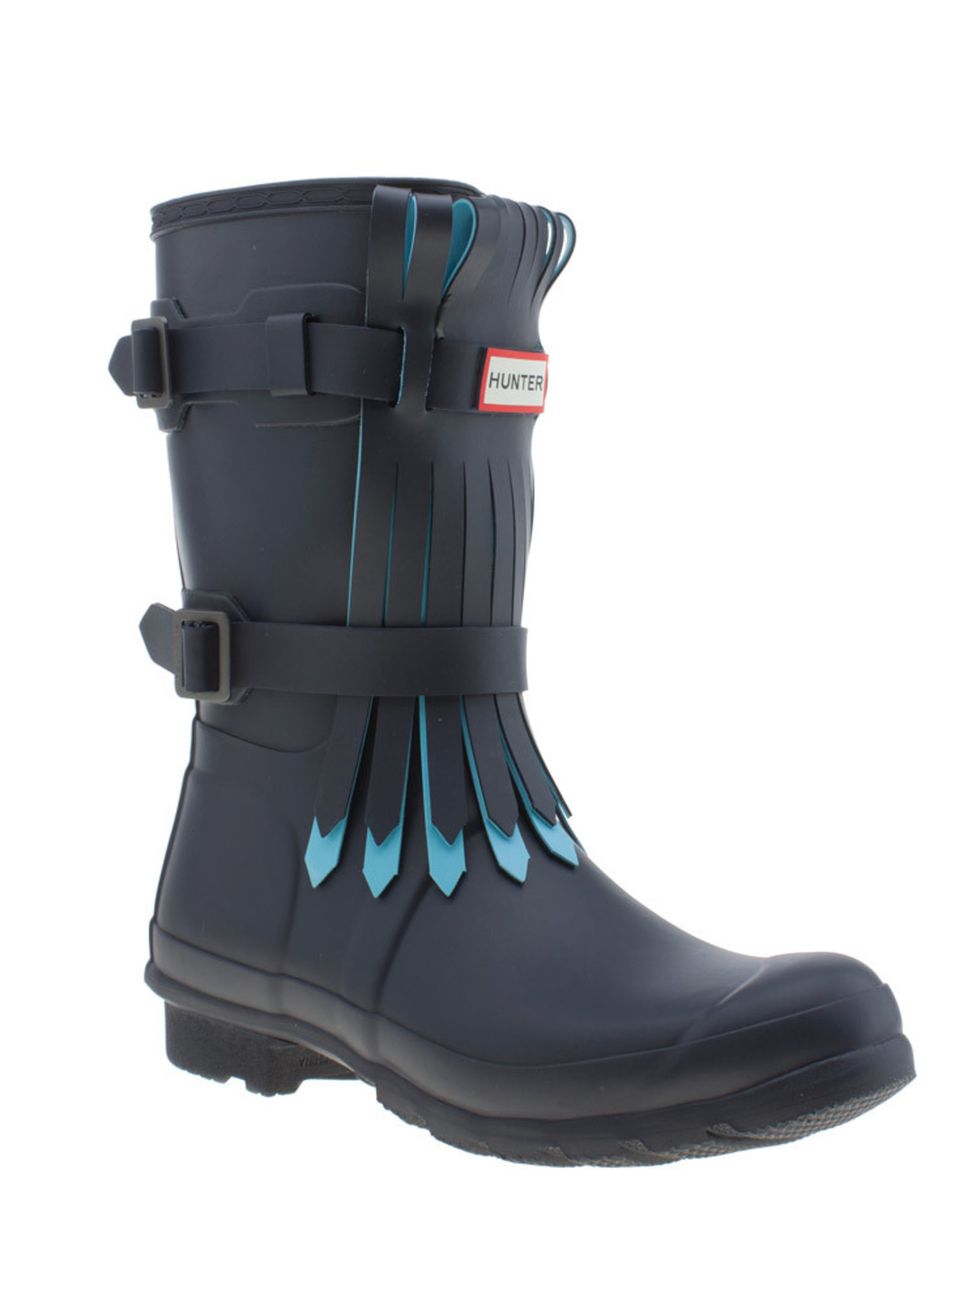 <p>Hunter boot, £130 at <a href="http://www.schuh.co.uk/womens/hunter-original-short-fringe-navy-and-pl-blue-boots/1458145460/" target="_blank">schuh.co.uk</a></p>